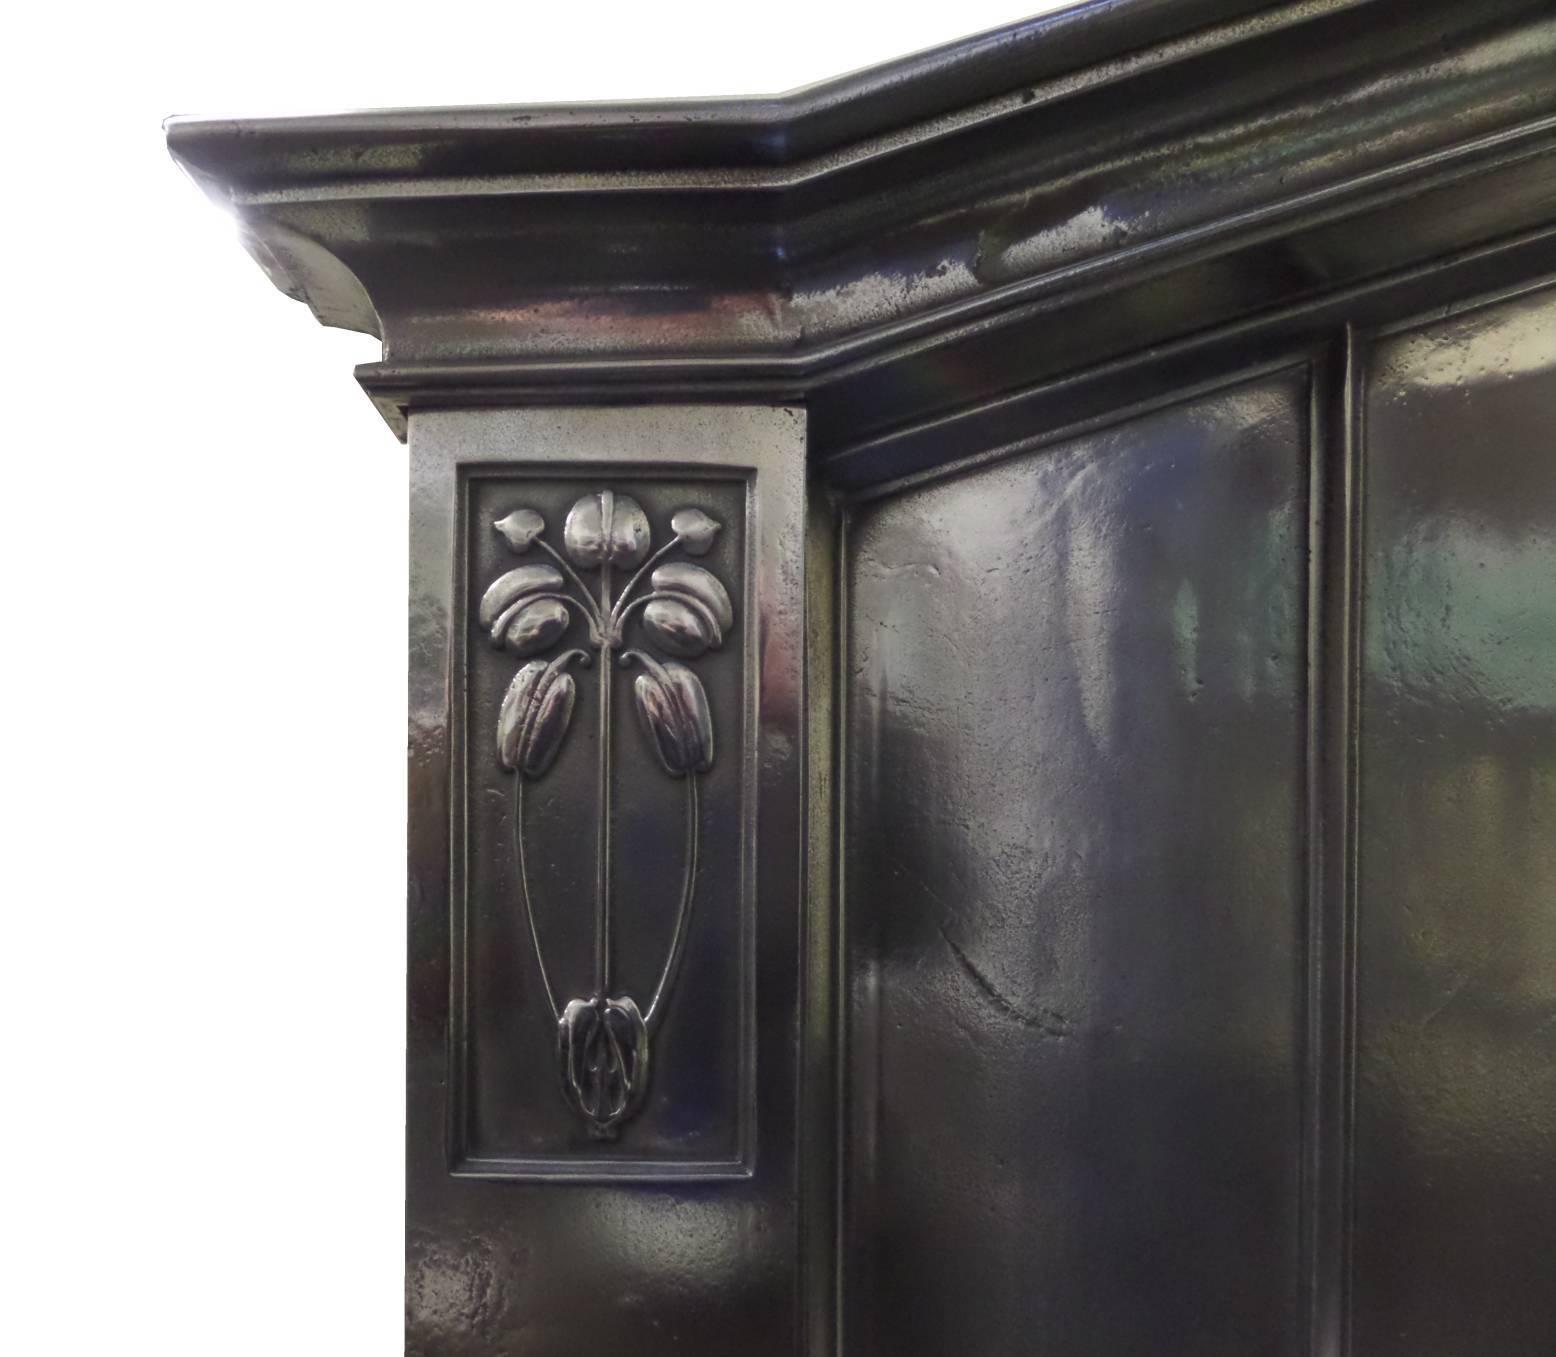 Antique restored Arts and Craft burnished (semi - polished) cast iron surround. This surround also has Art Nouveau design influence especially the floral cast patterns, circa 1905. The surround was purchased from a sea side villa in north Yorkshire,